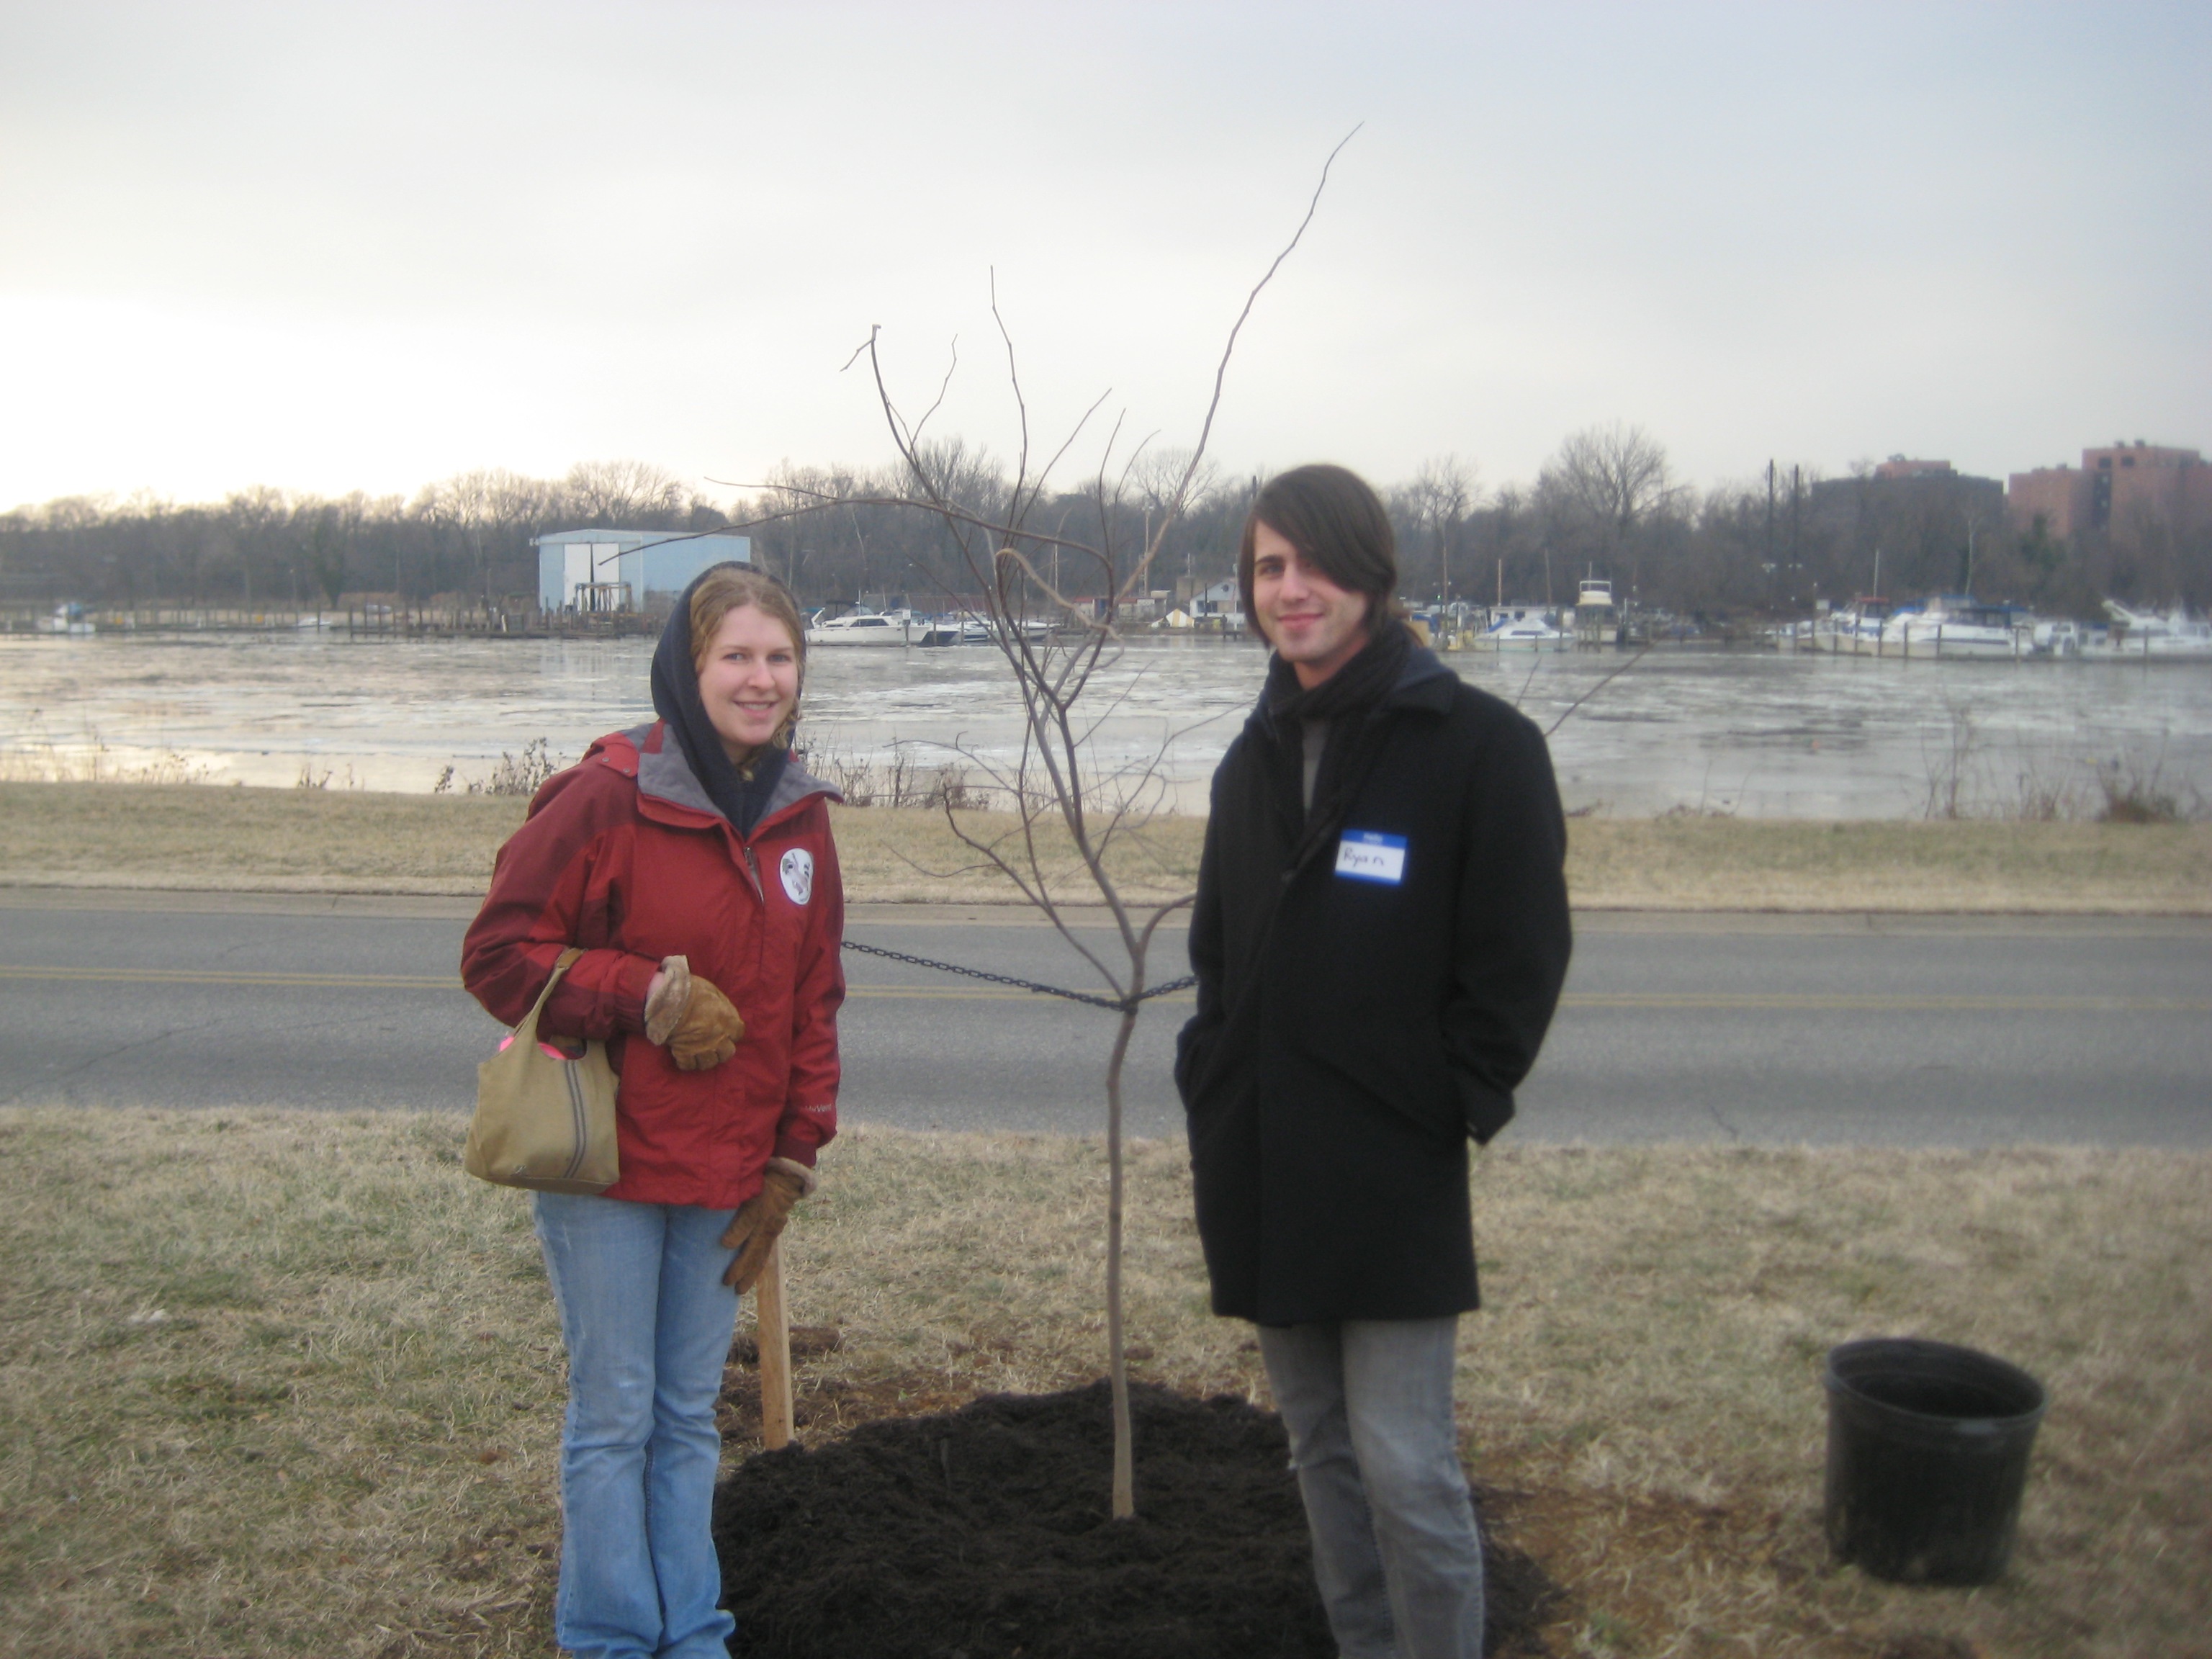 Sara Murrill (left), a College of Natural Resources forestry graduate student at Virginia Tech and Virginia Tech aerospace alumnus Ryan Wagoner of Fairfax, Va., helped a thousand kids plant 44 trees at Anacostia National Park in Washington D.C., in honor of President Barack Obama.